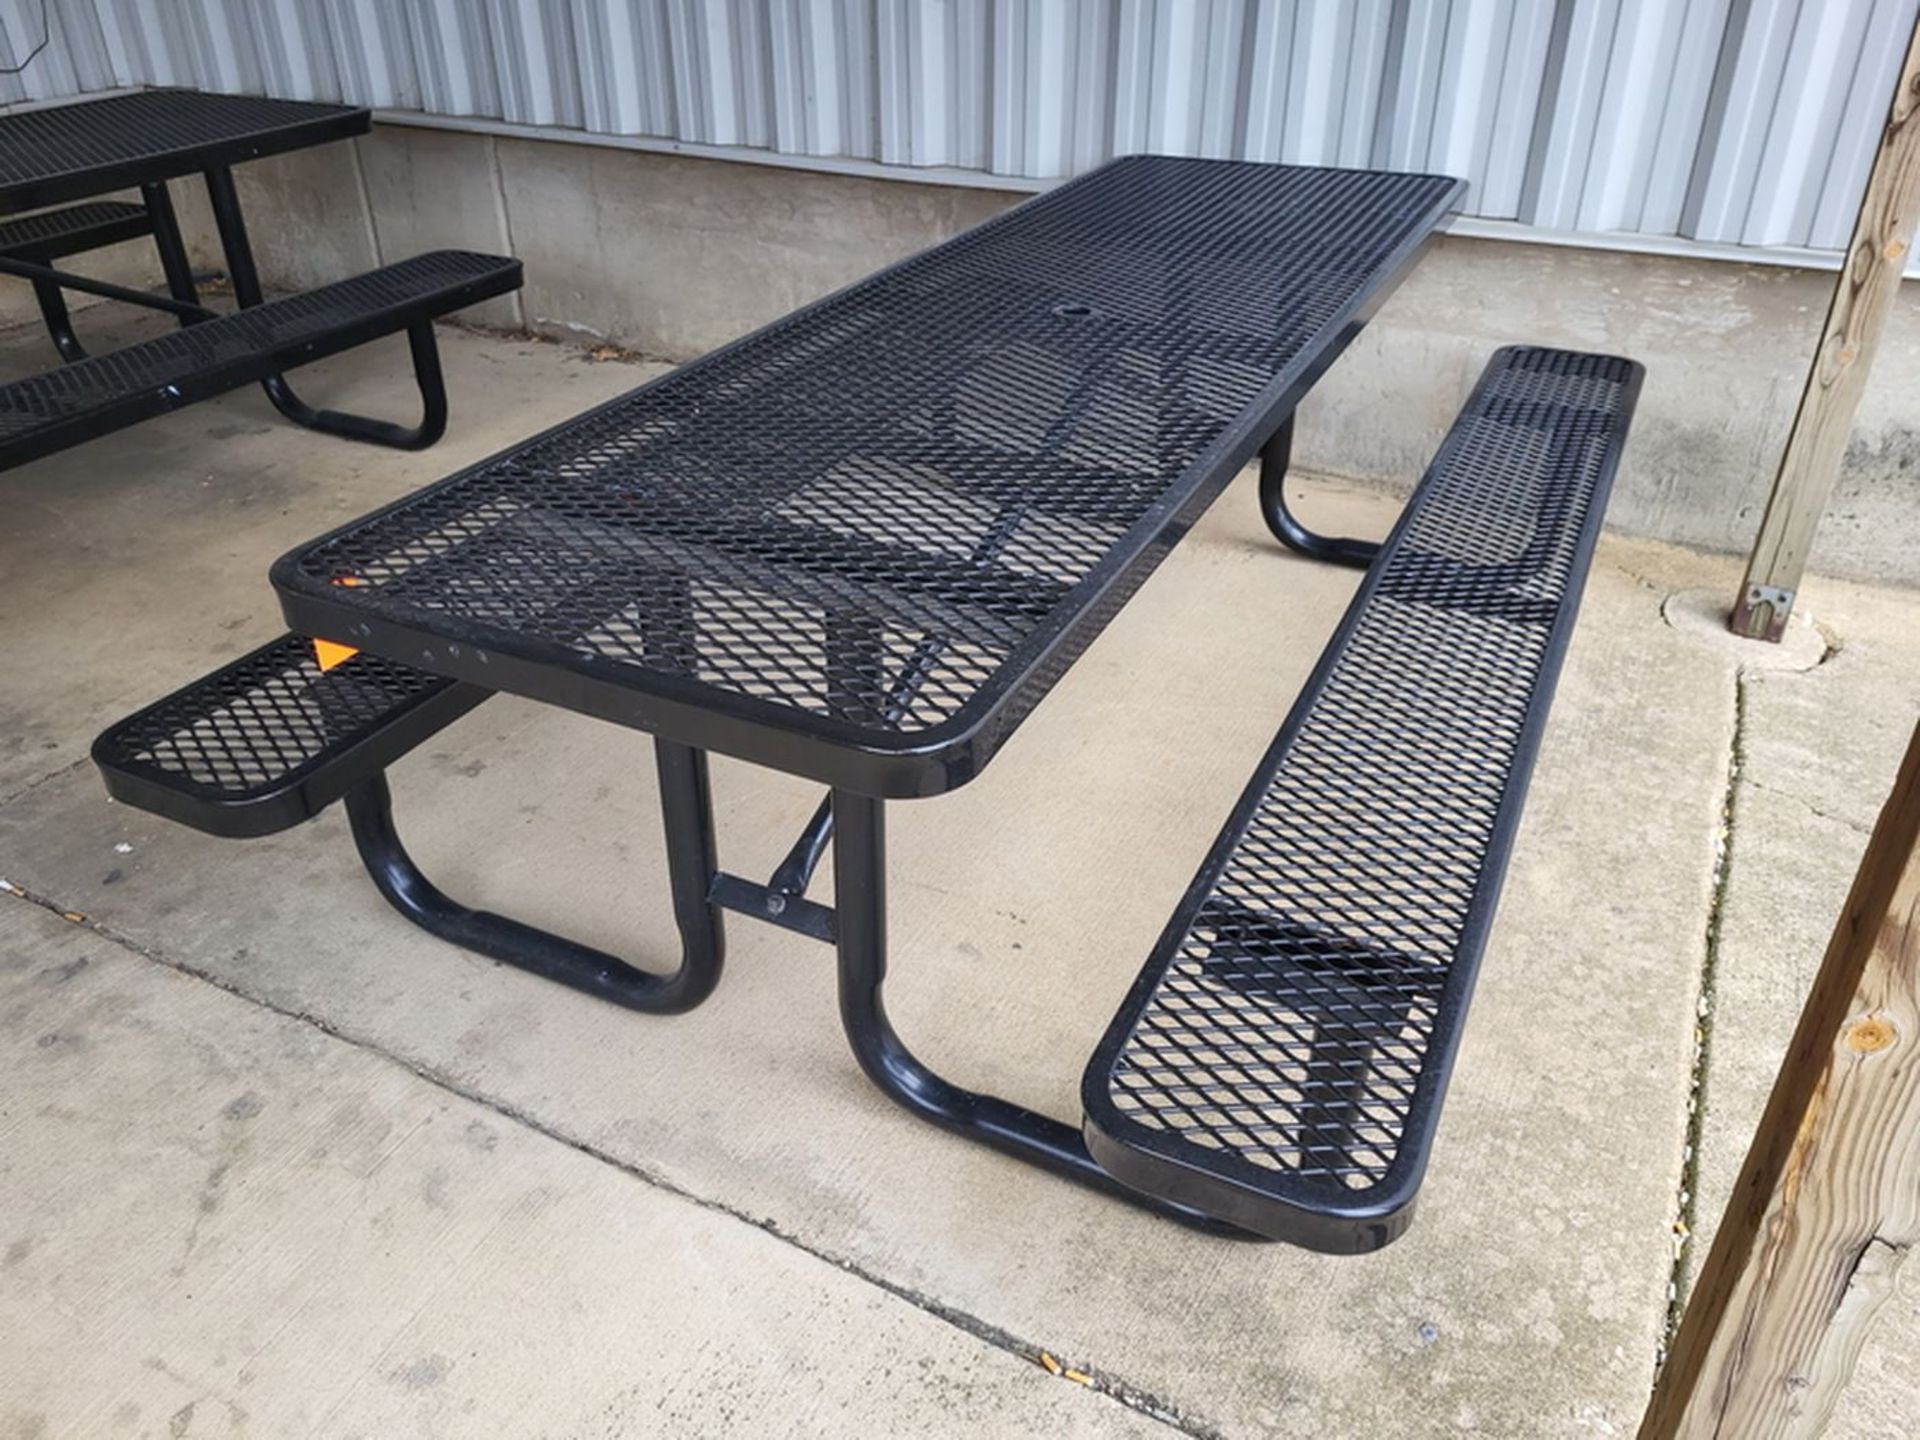 Outdoor Picnic Table; Plastic Coated Steel, 30 in. x 96 in. - Image 2 of 2